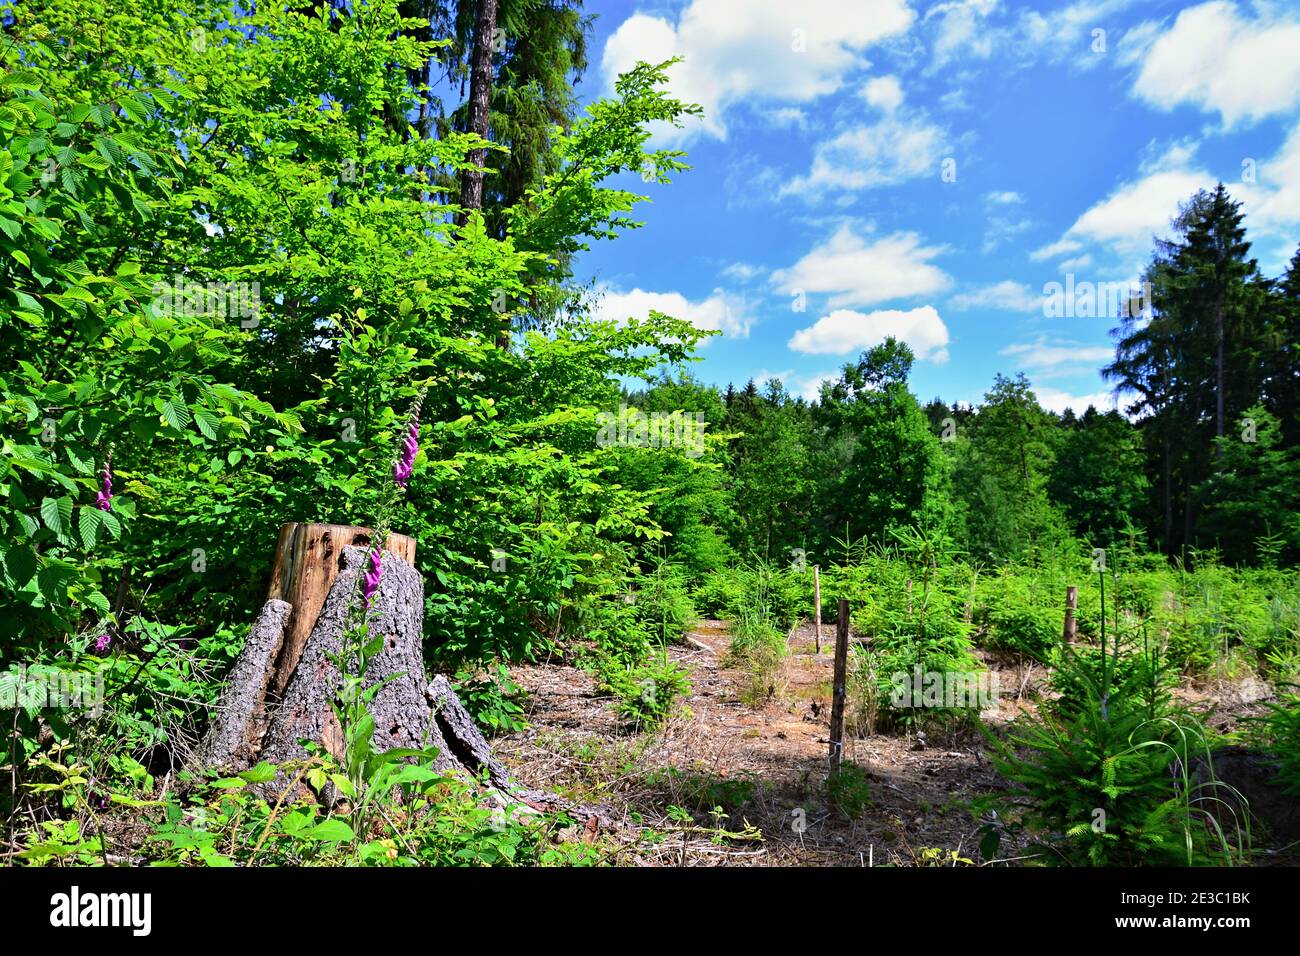 Meadow in forest with tree stump, flowers and sky with clouds. Relaxation and rest in the forest. Stock Photo